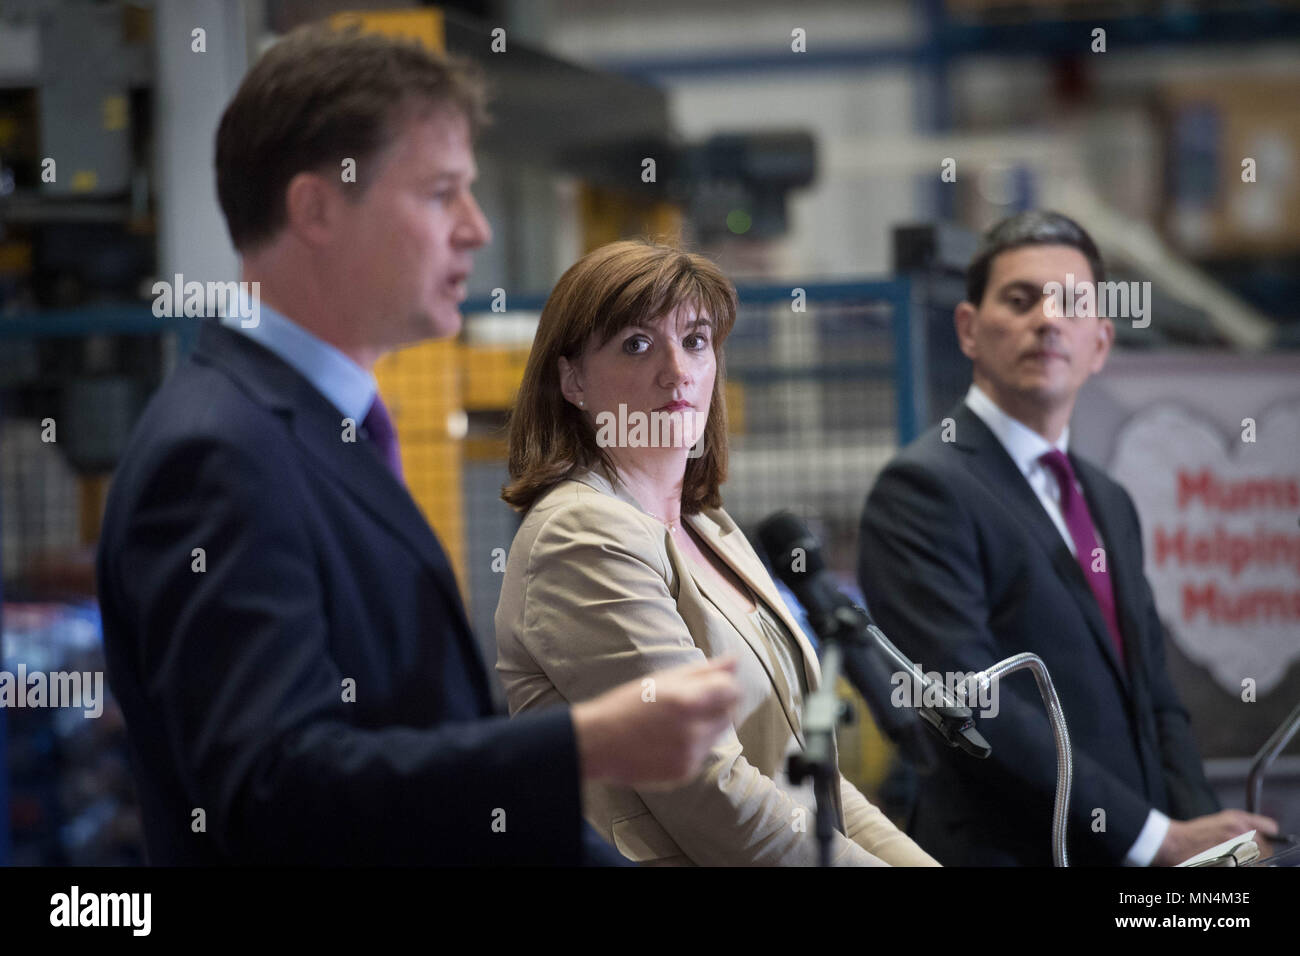 (left to right) Liberal Democrat former deputy PM Sir Nick Clegg, Tory ex-education secretary Nicky Morgan and Labour former foreign secretary David Miliband speaking at a cross-party intervention Brexit negotiation at Tilda Rice Mill in Rainham, Essex. Stock Photo